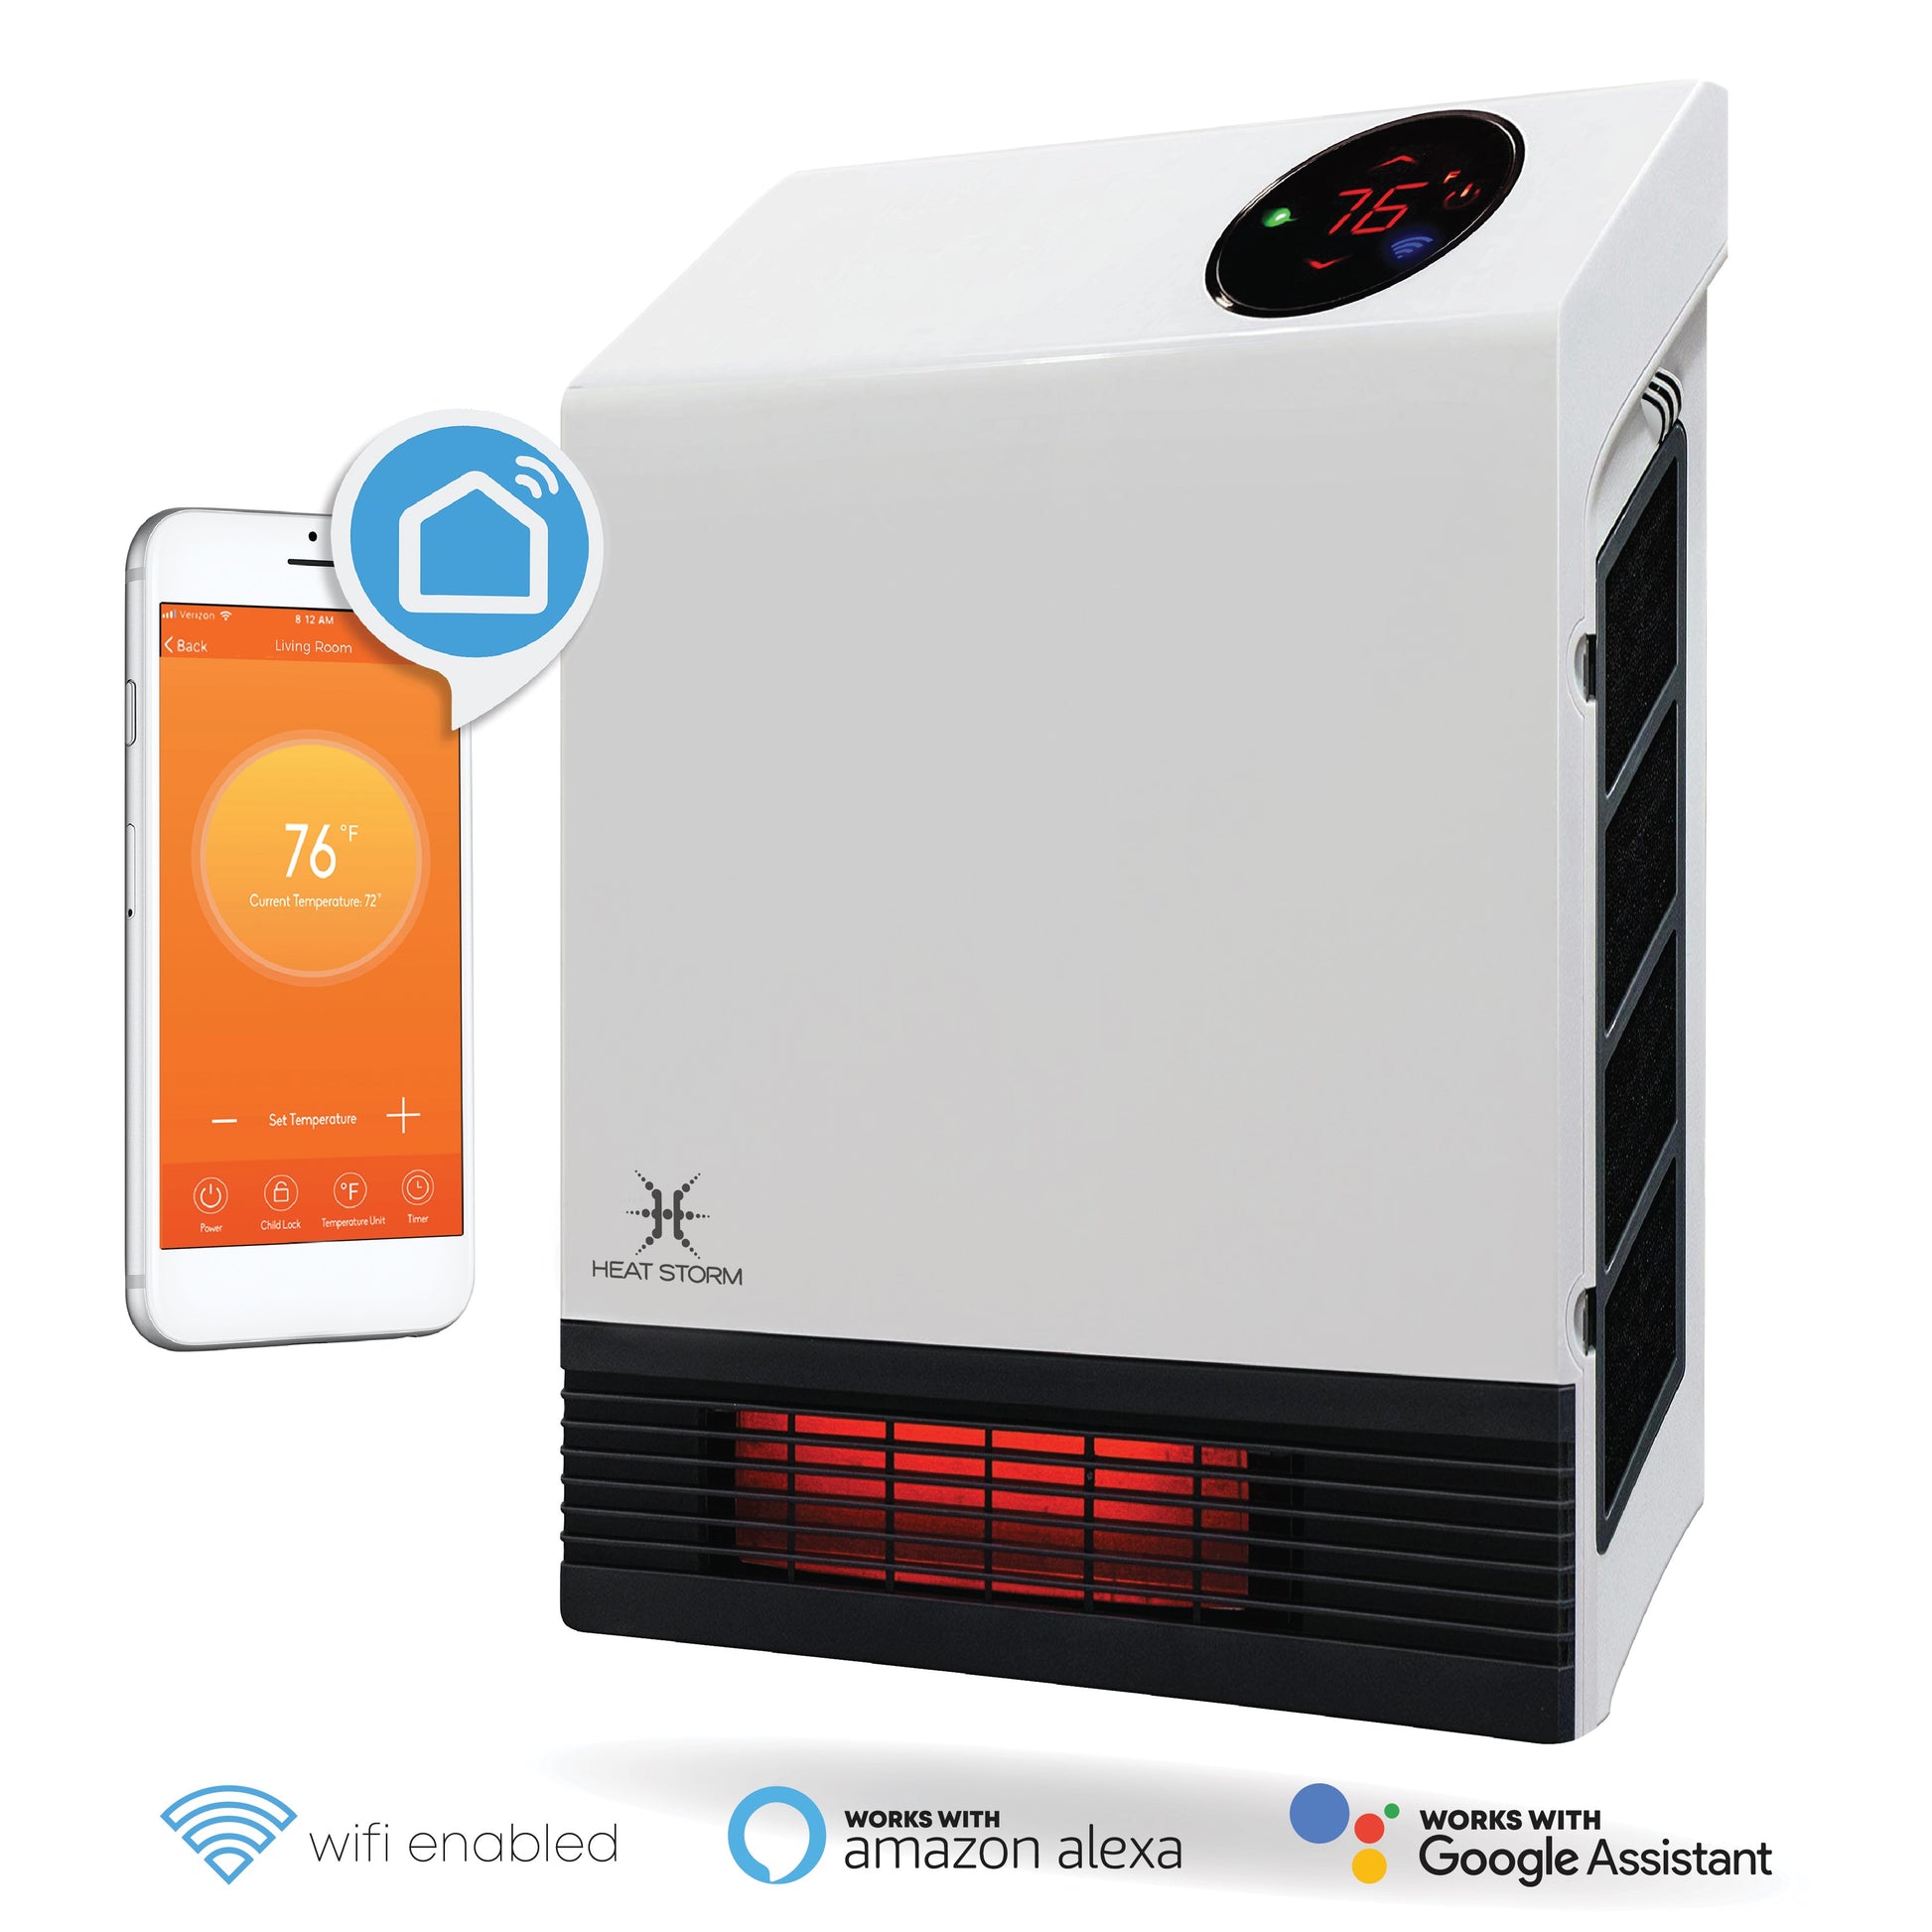 1000 watt smart infrared space heater. Space heater with smart WIFI capabilities. Can connect with Google Assistant and Amazon Alexa.